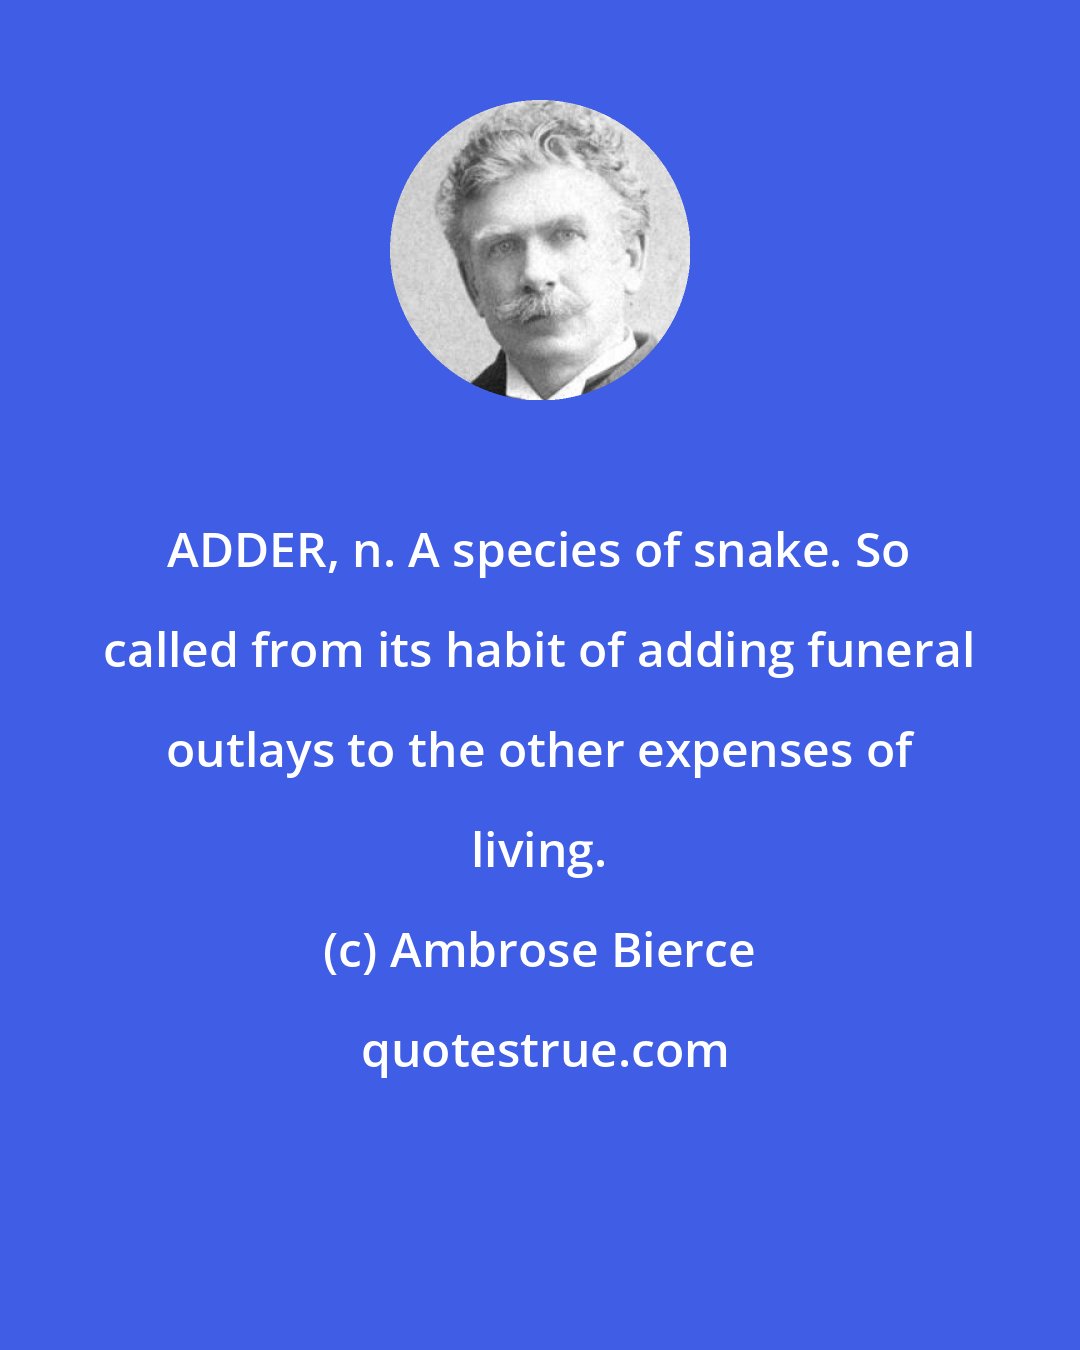 Ambrose Bierce: ADDER, n. A species of snake. So called from its habit of adding funeral outlays to the other expenses of living.